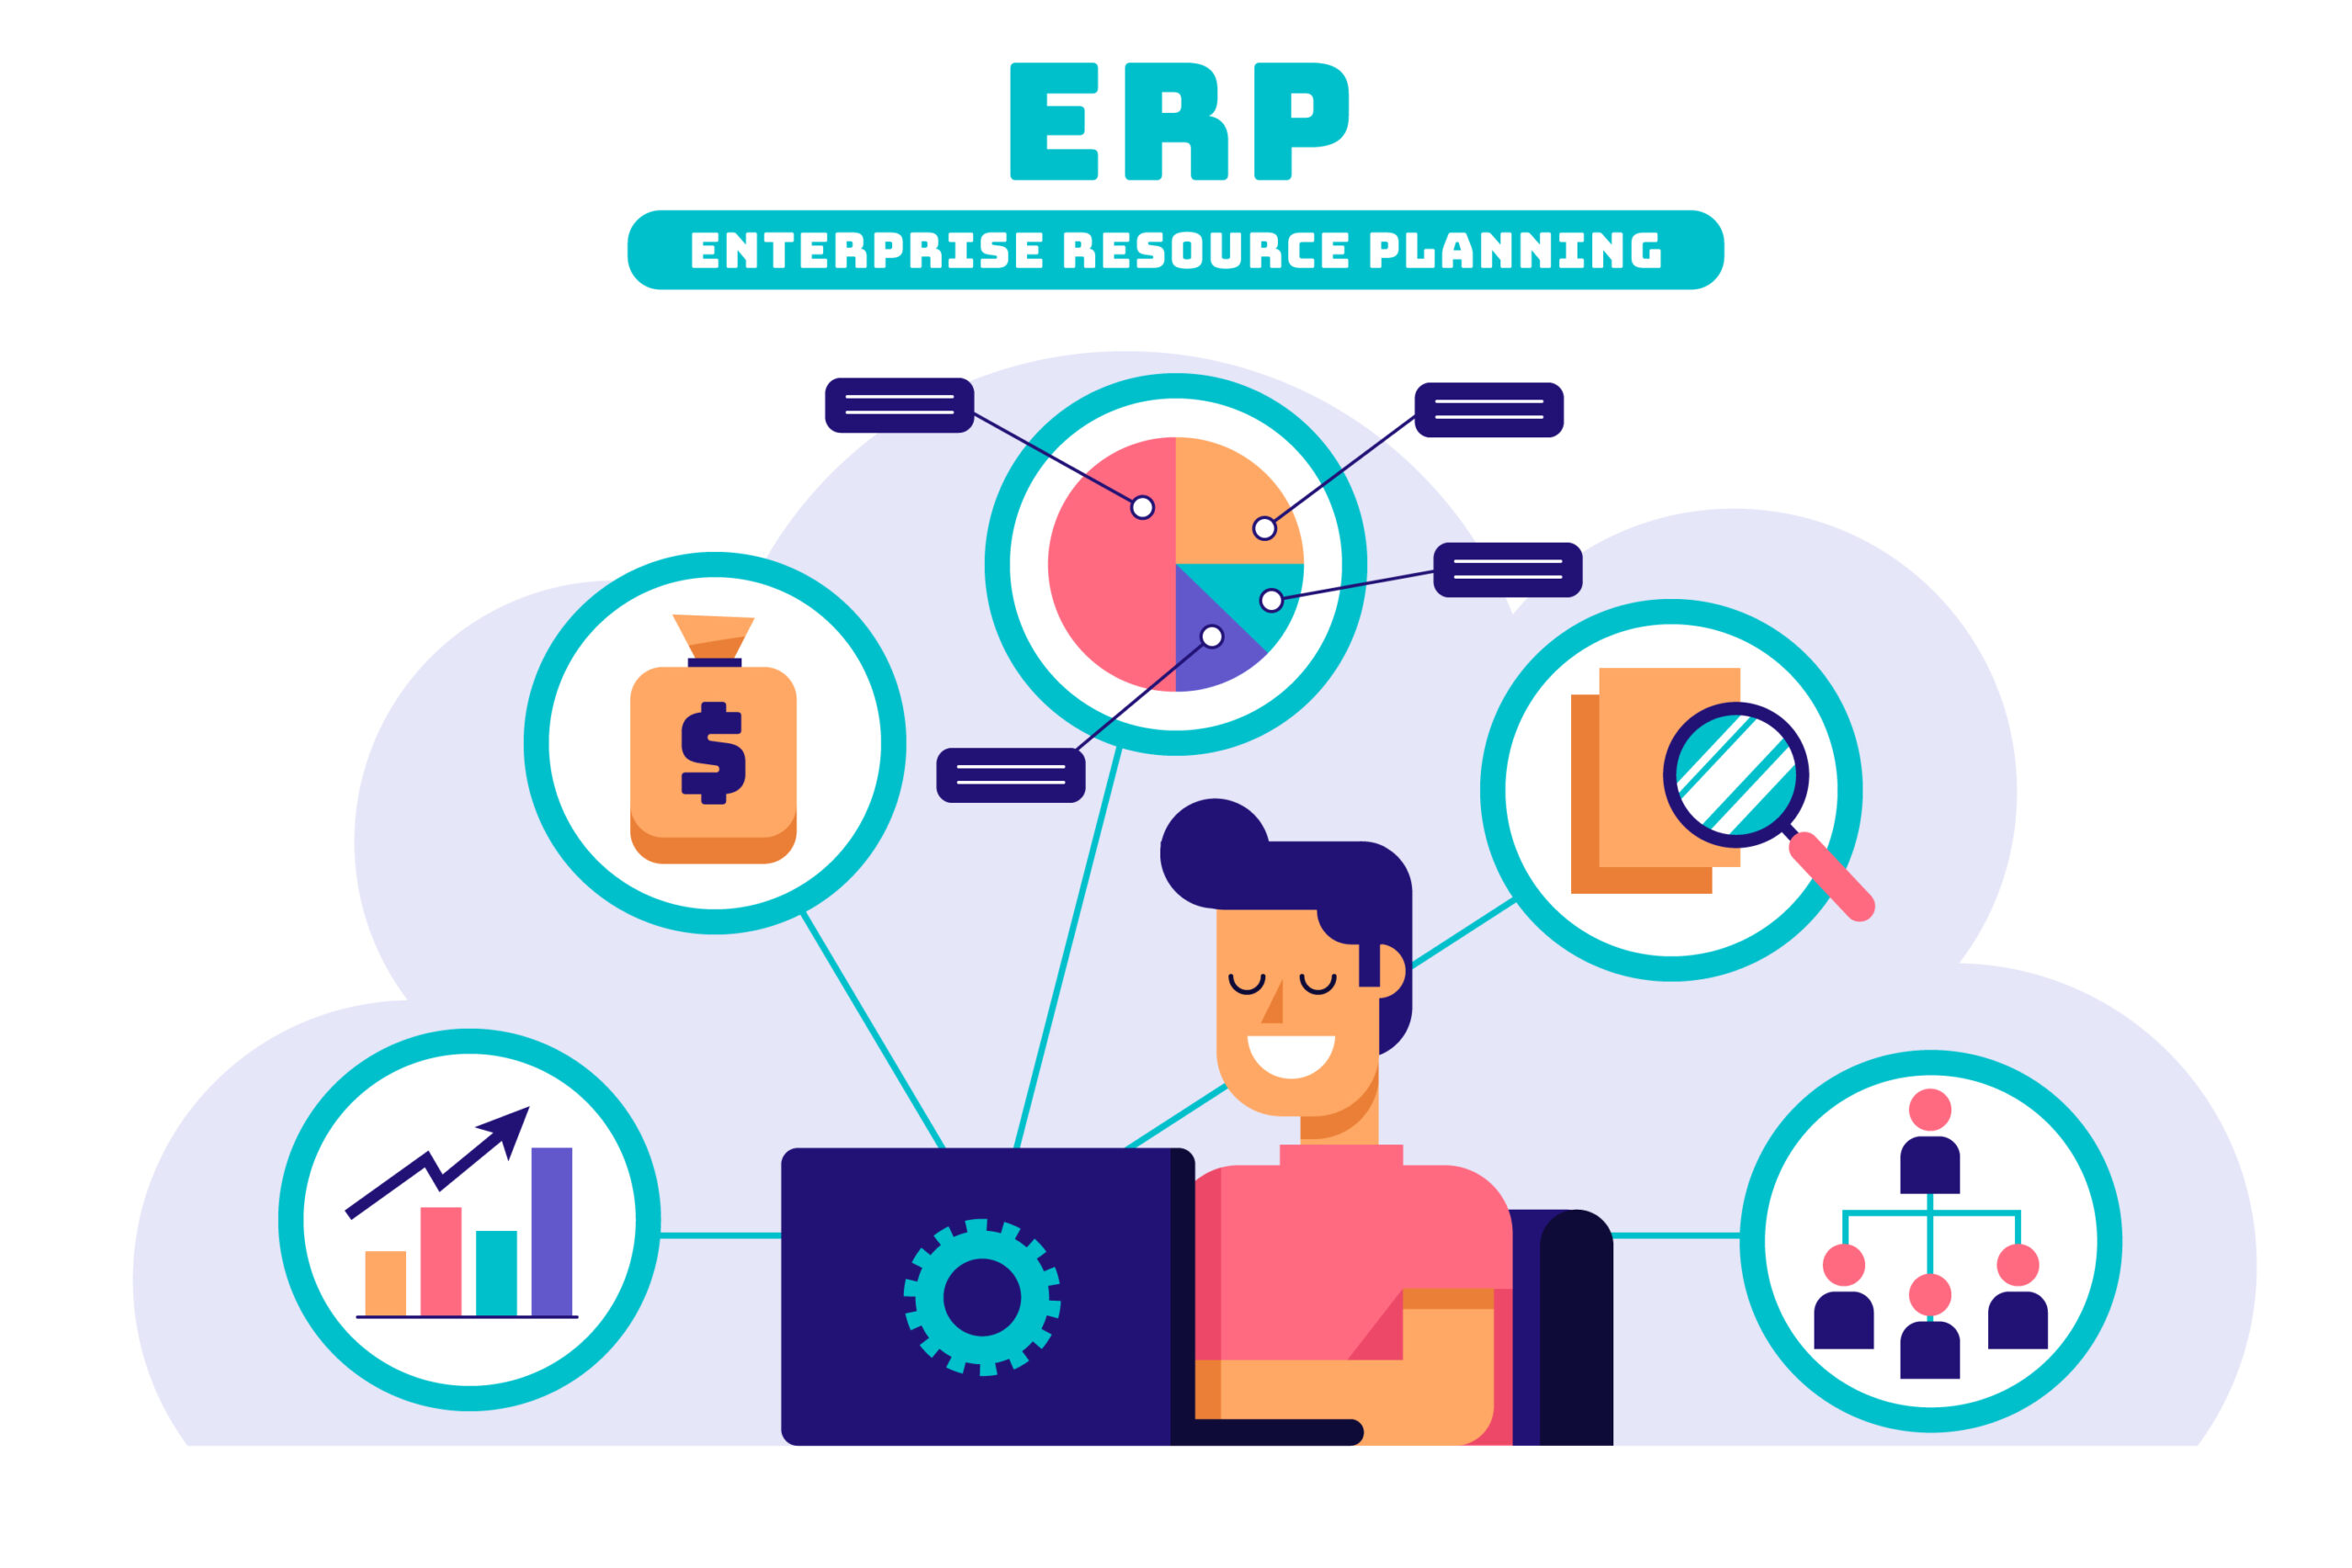 https://gadgetsbynow.com/Leading ERP systems in the UAE